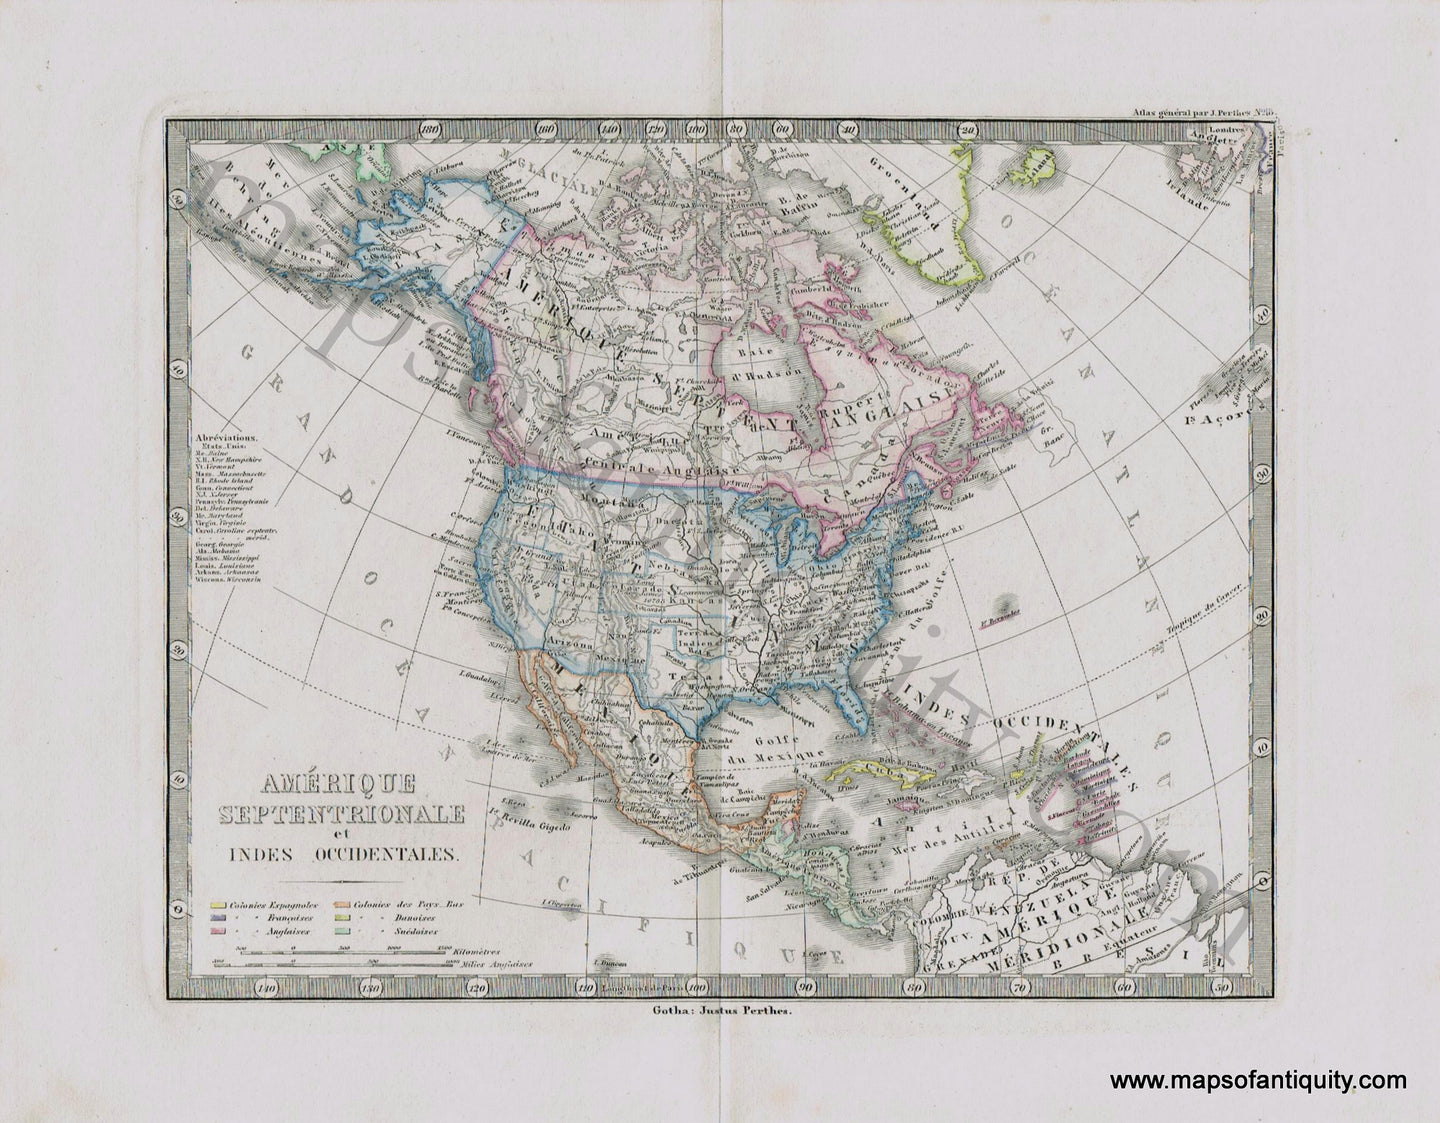 North-America-and-the-Caribbean-Amerique-Septentrionale-et-Indes-Occidentales-Perthes-1871-Antique-Map-1870s-1800s-19th-century-Maps-of-Antiquity